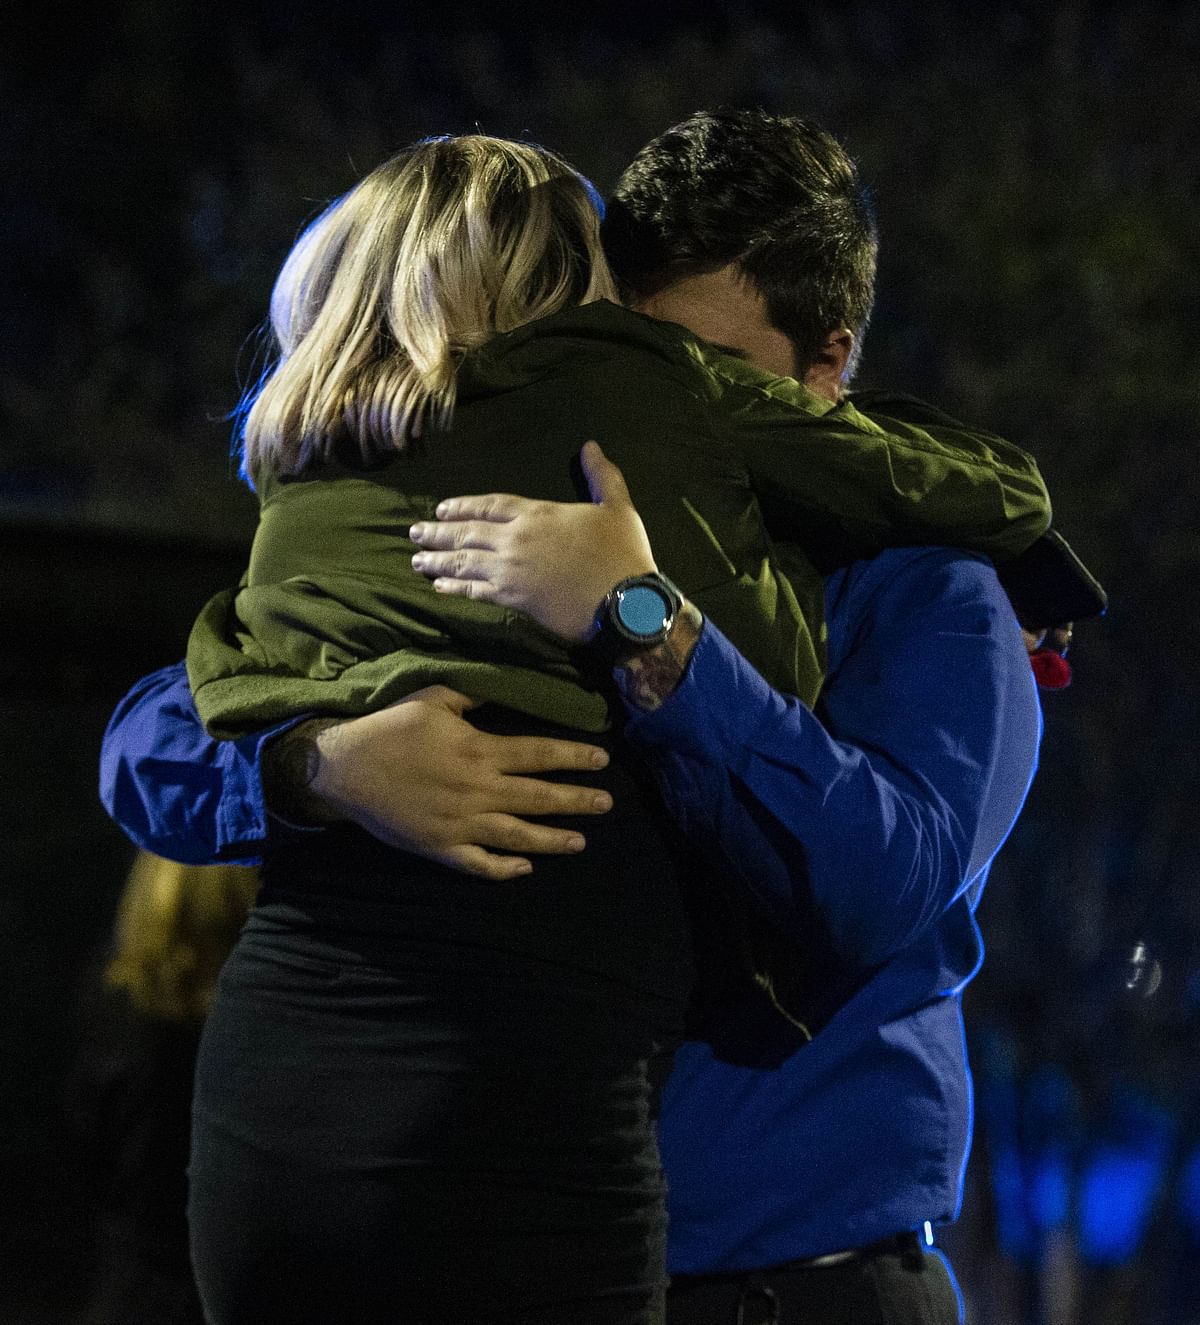 Nick Cessna, right, confronts his girlfriend Melissa Hutchinson who rendered aid to some of the victims of a mass shooting on 2 November 2018 in Tallahassee, Florida. Photo: AFP